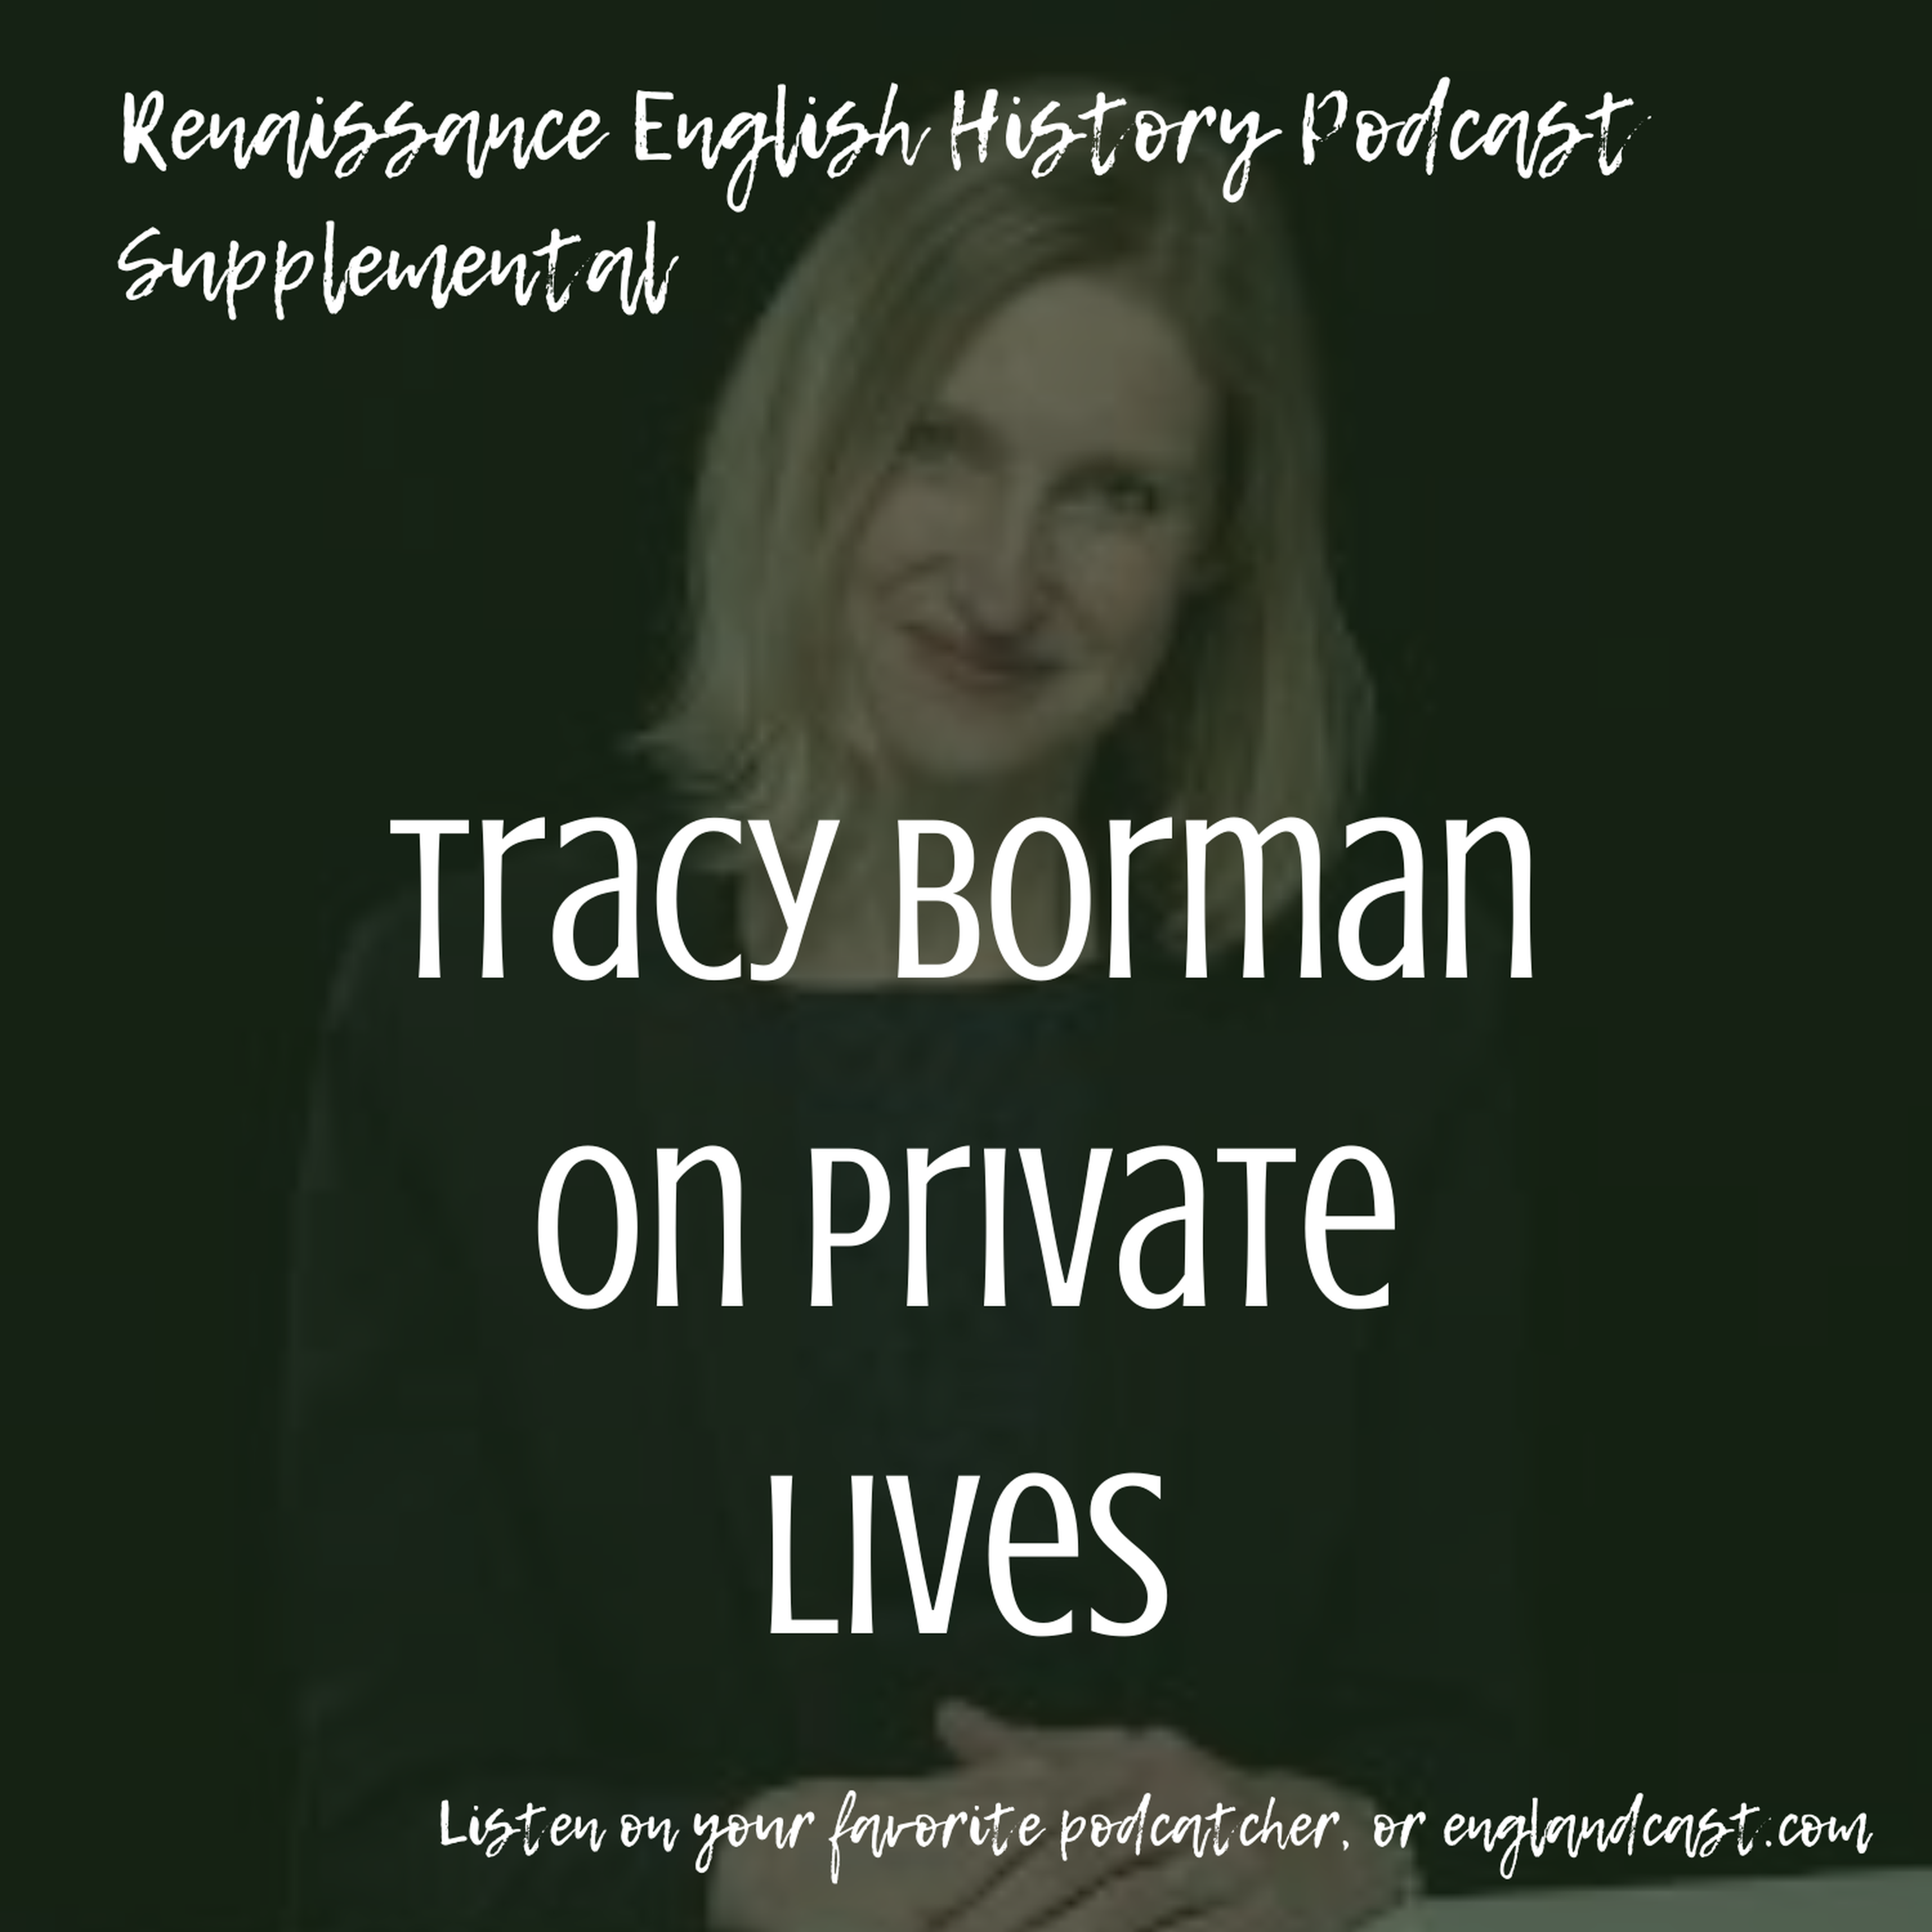 Supplemental: Tracy Borman on Private Lives